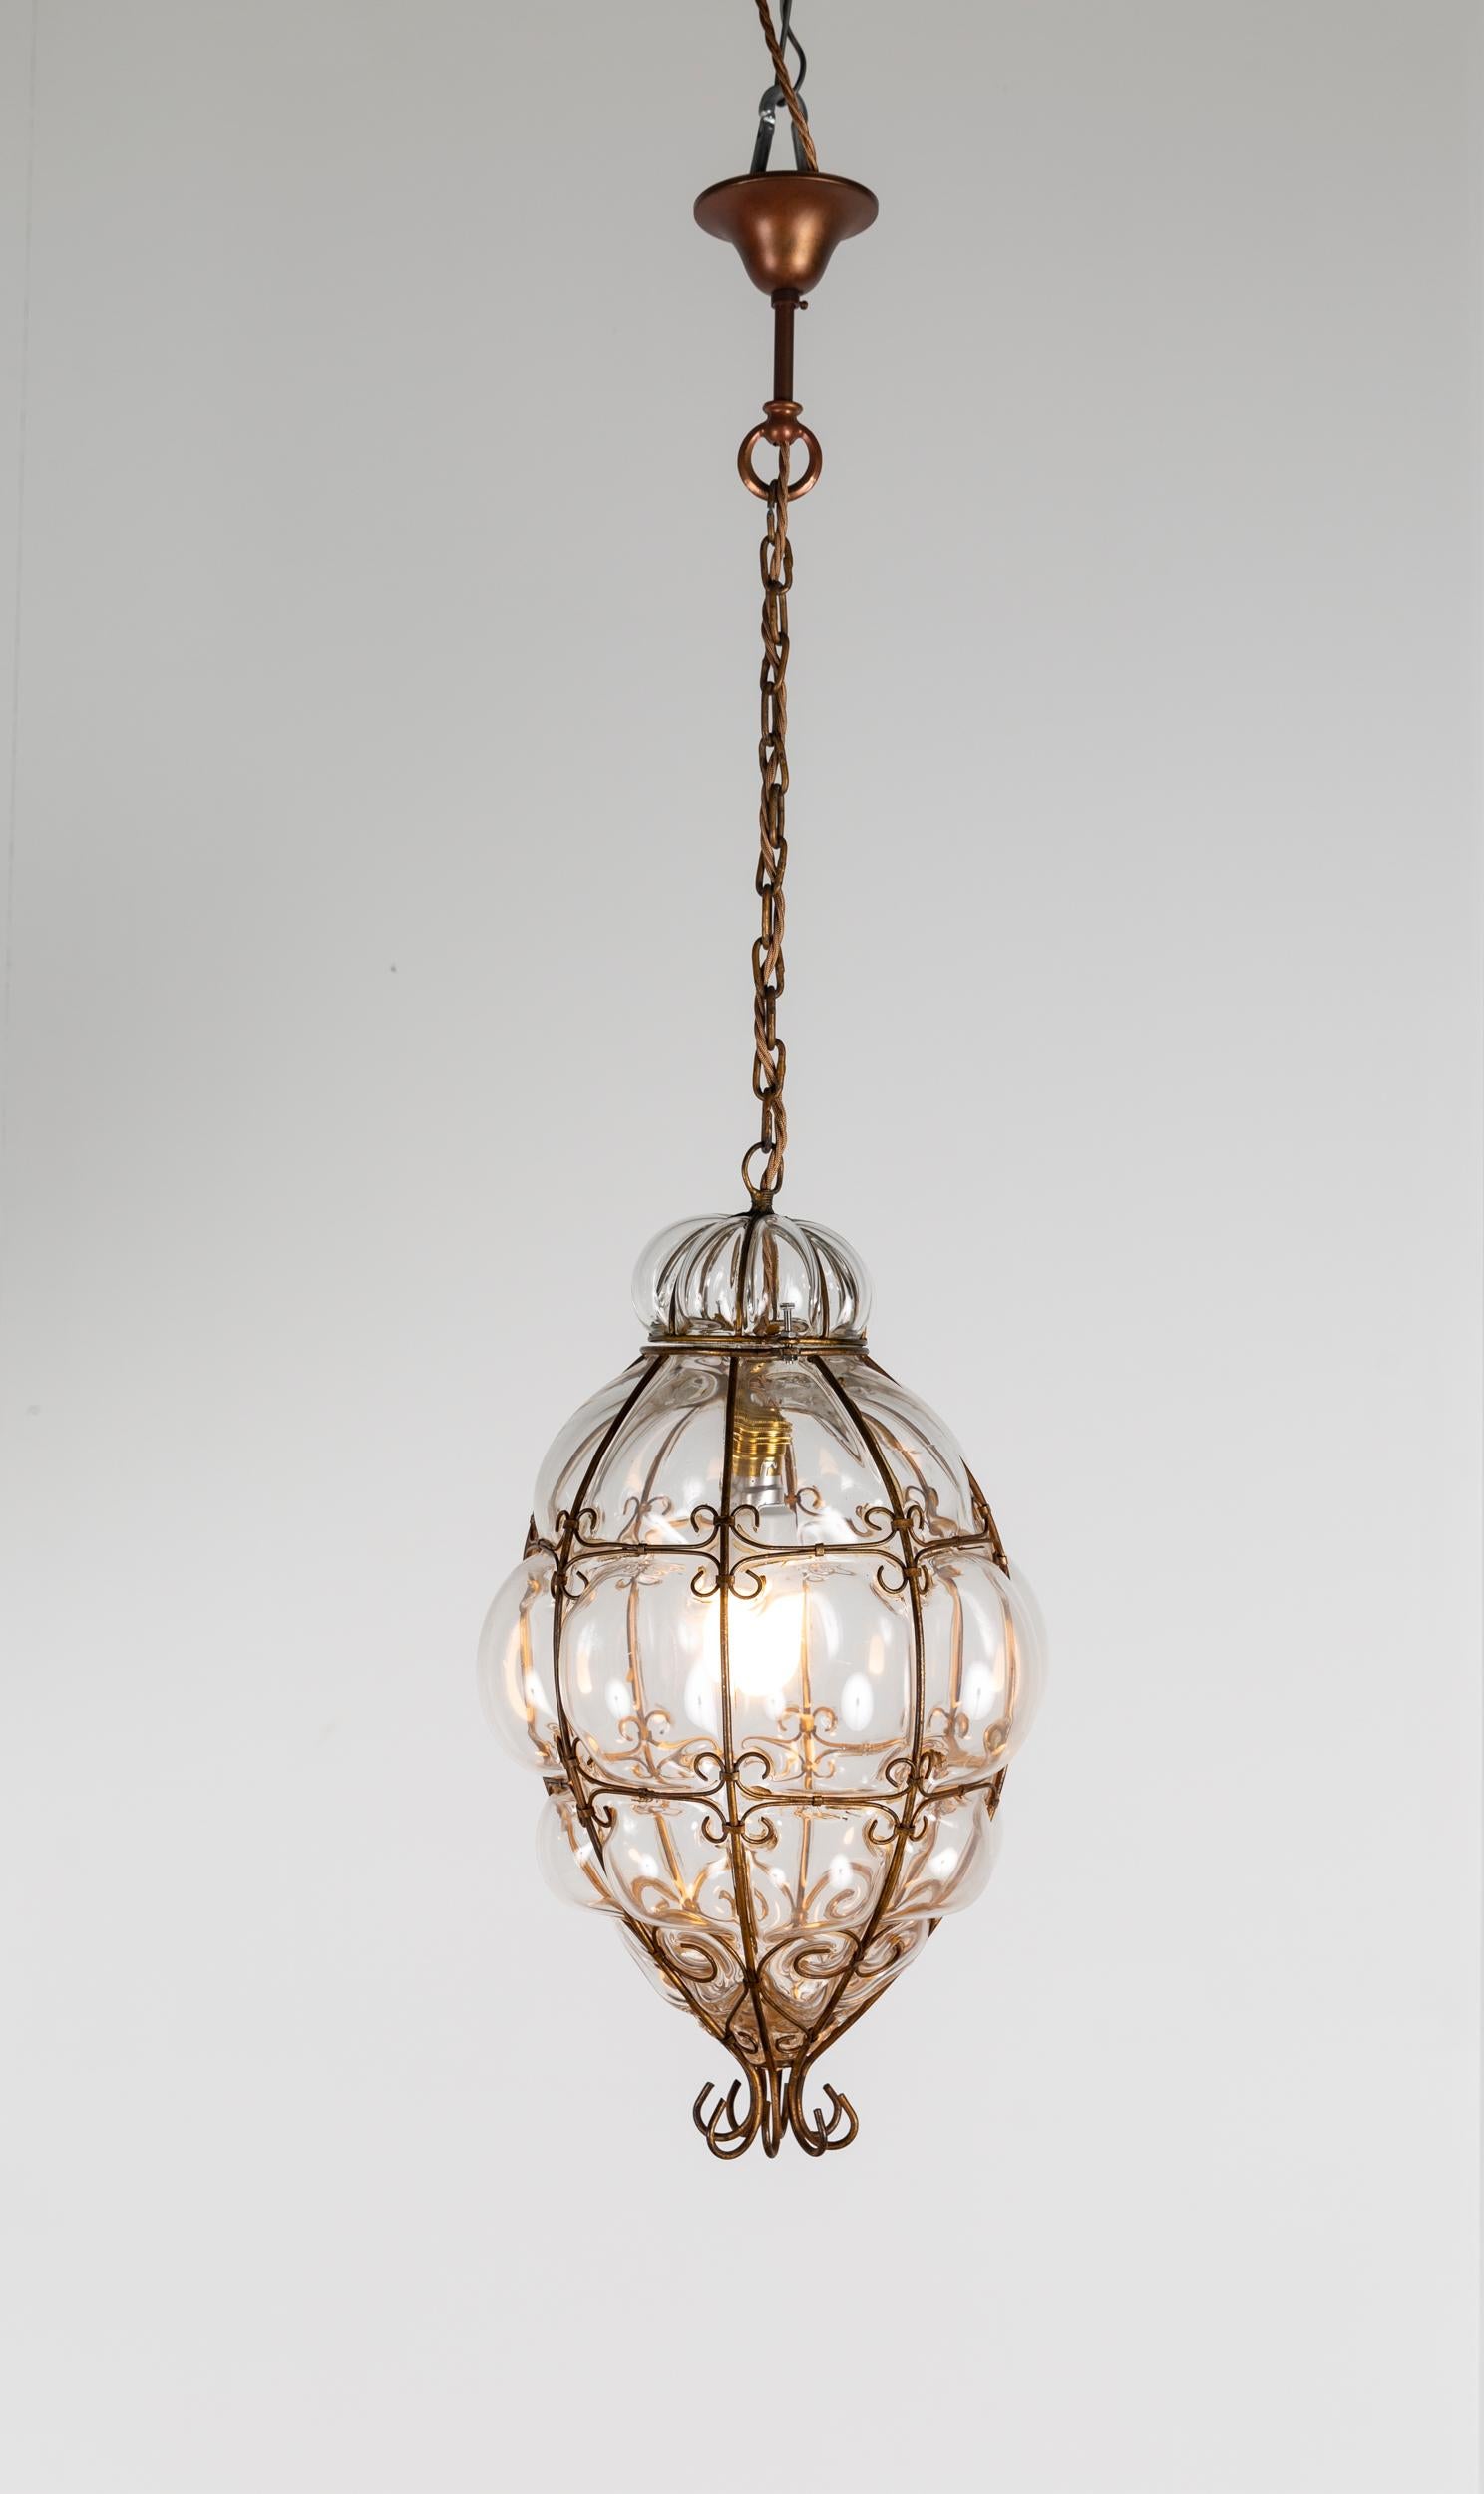 Pair of Archimede Seguso Murano Caged Glass Pendant Lights In Good Condition For Sale In Toorak, VIC